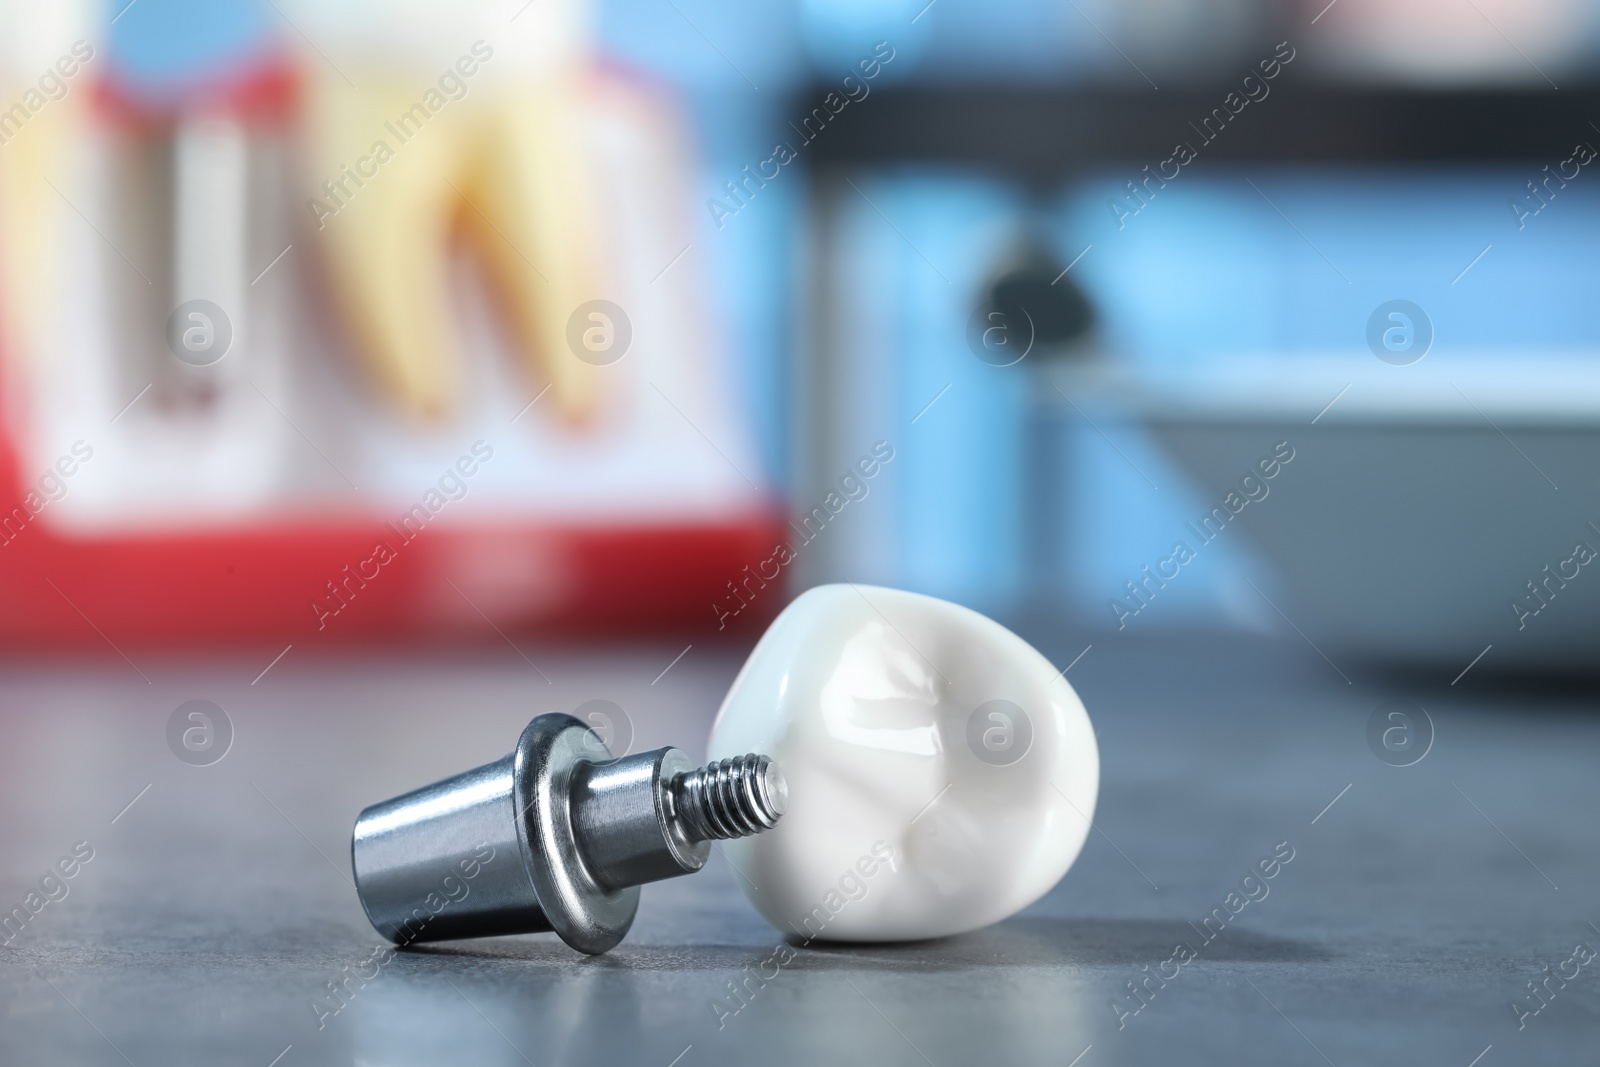 Photo of Abutment and crown of dental implant on table in clinic, closeup